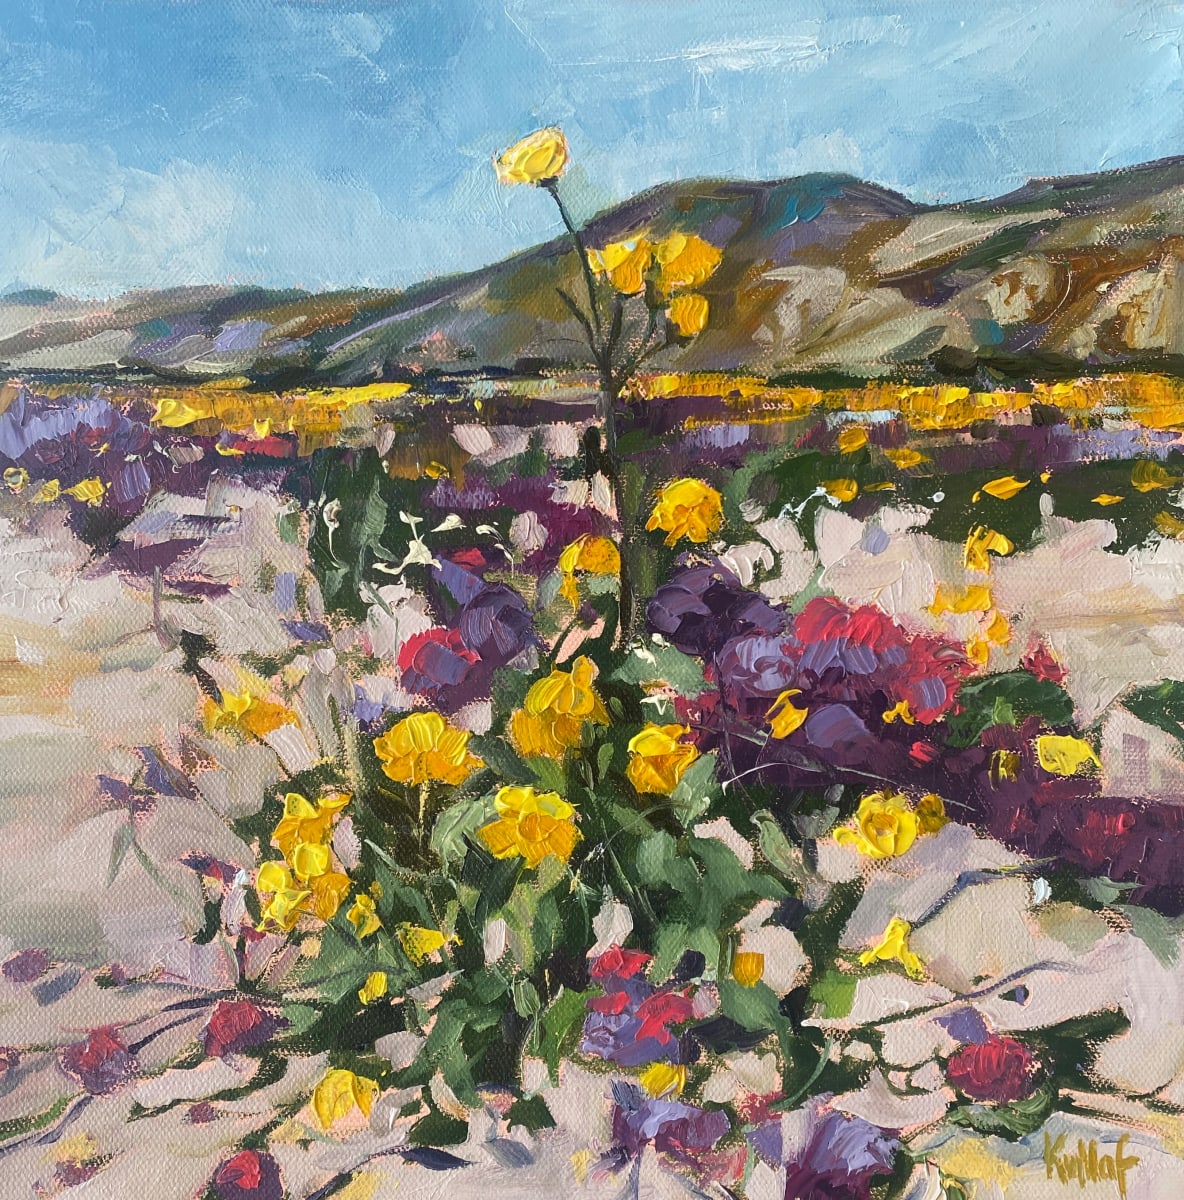 Desert Flower Magic by Anne Kullaf  Image: Desert Flowers form a carpet of color leading to the distant mountains in the Anza Borrego Desert of Southern California